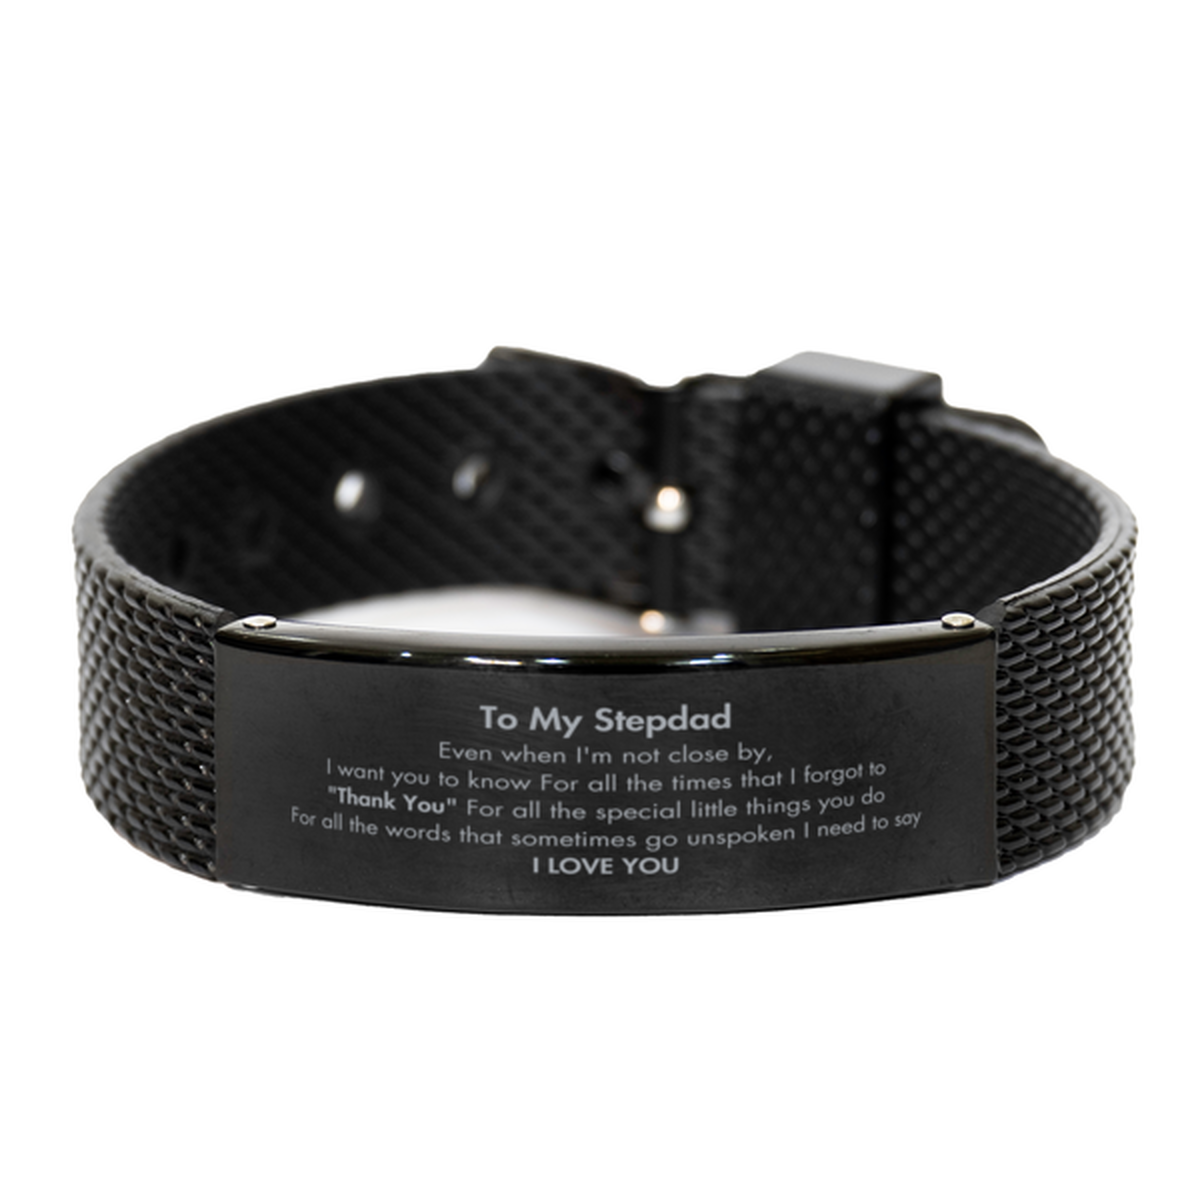 Thank You Gifts for Stepdad, Keepsake Black Shark Mesh Bracelet Gifts for Stepdad Birthday Mother's day Father's Day Stepdad For all the words That sometimes go unspoken I need to say I LOVE YOU